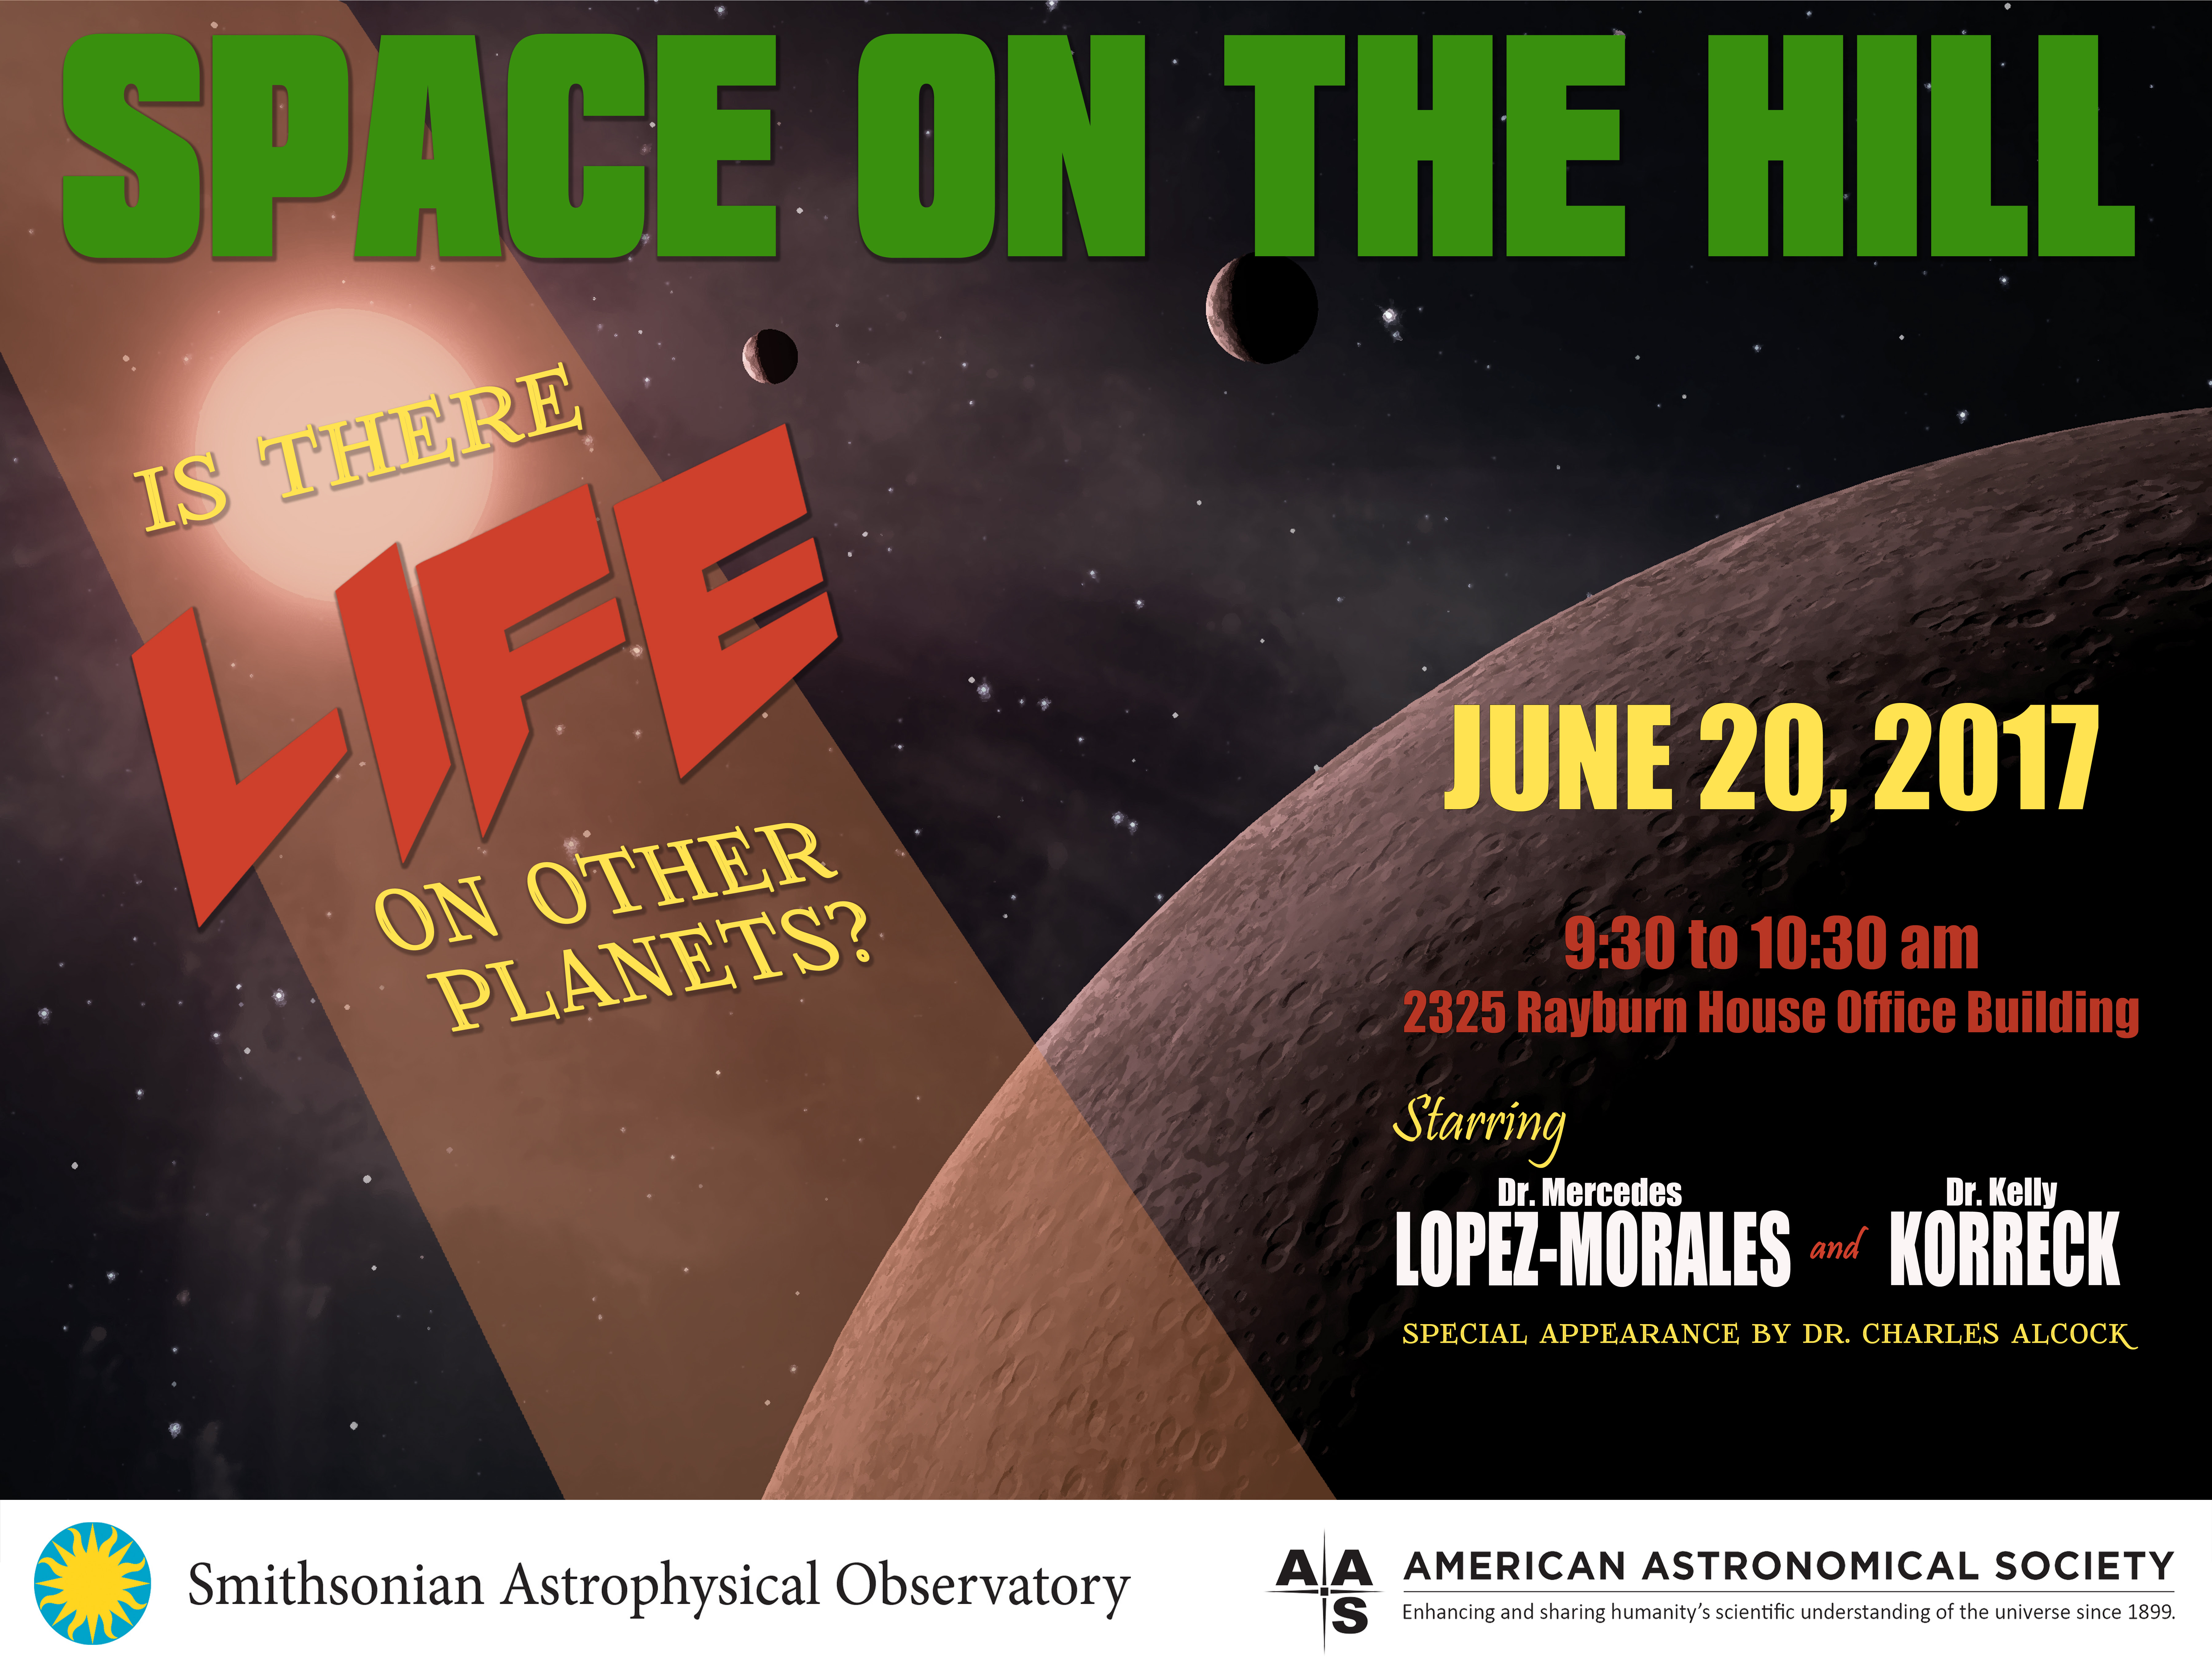 Space on the Hill RSVP